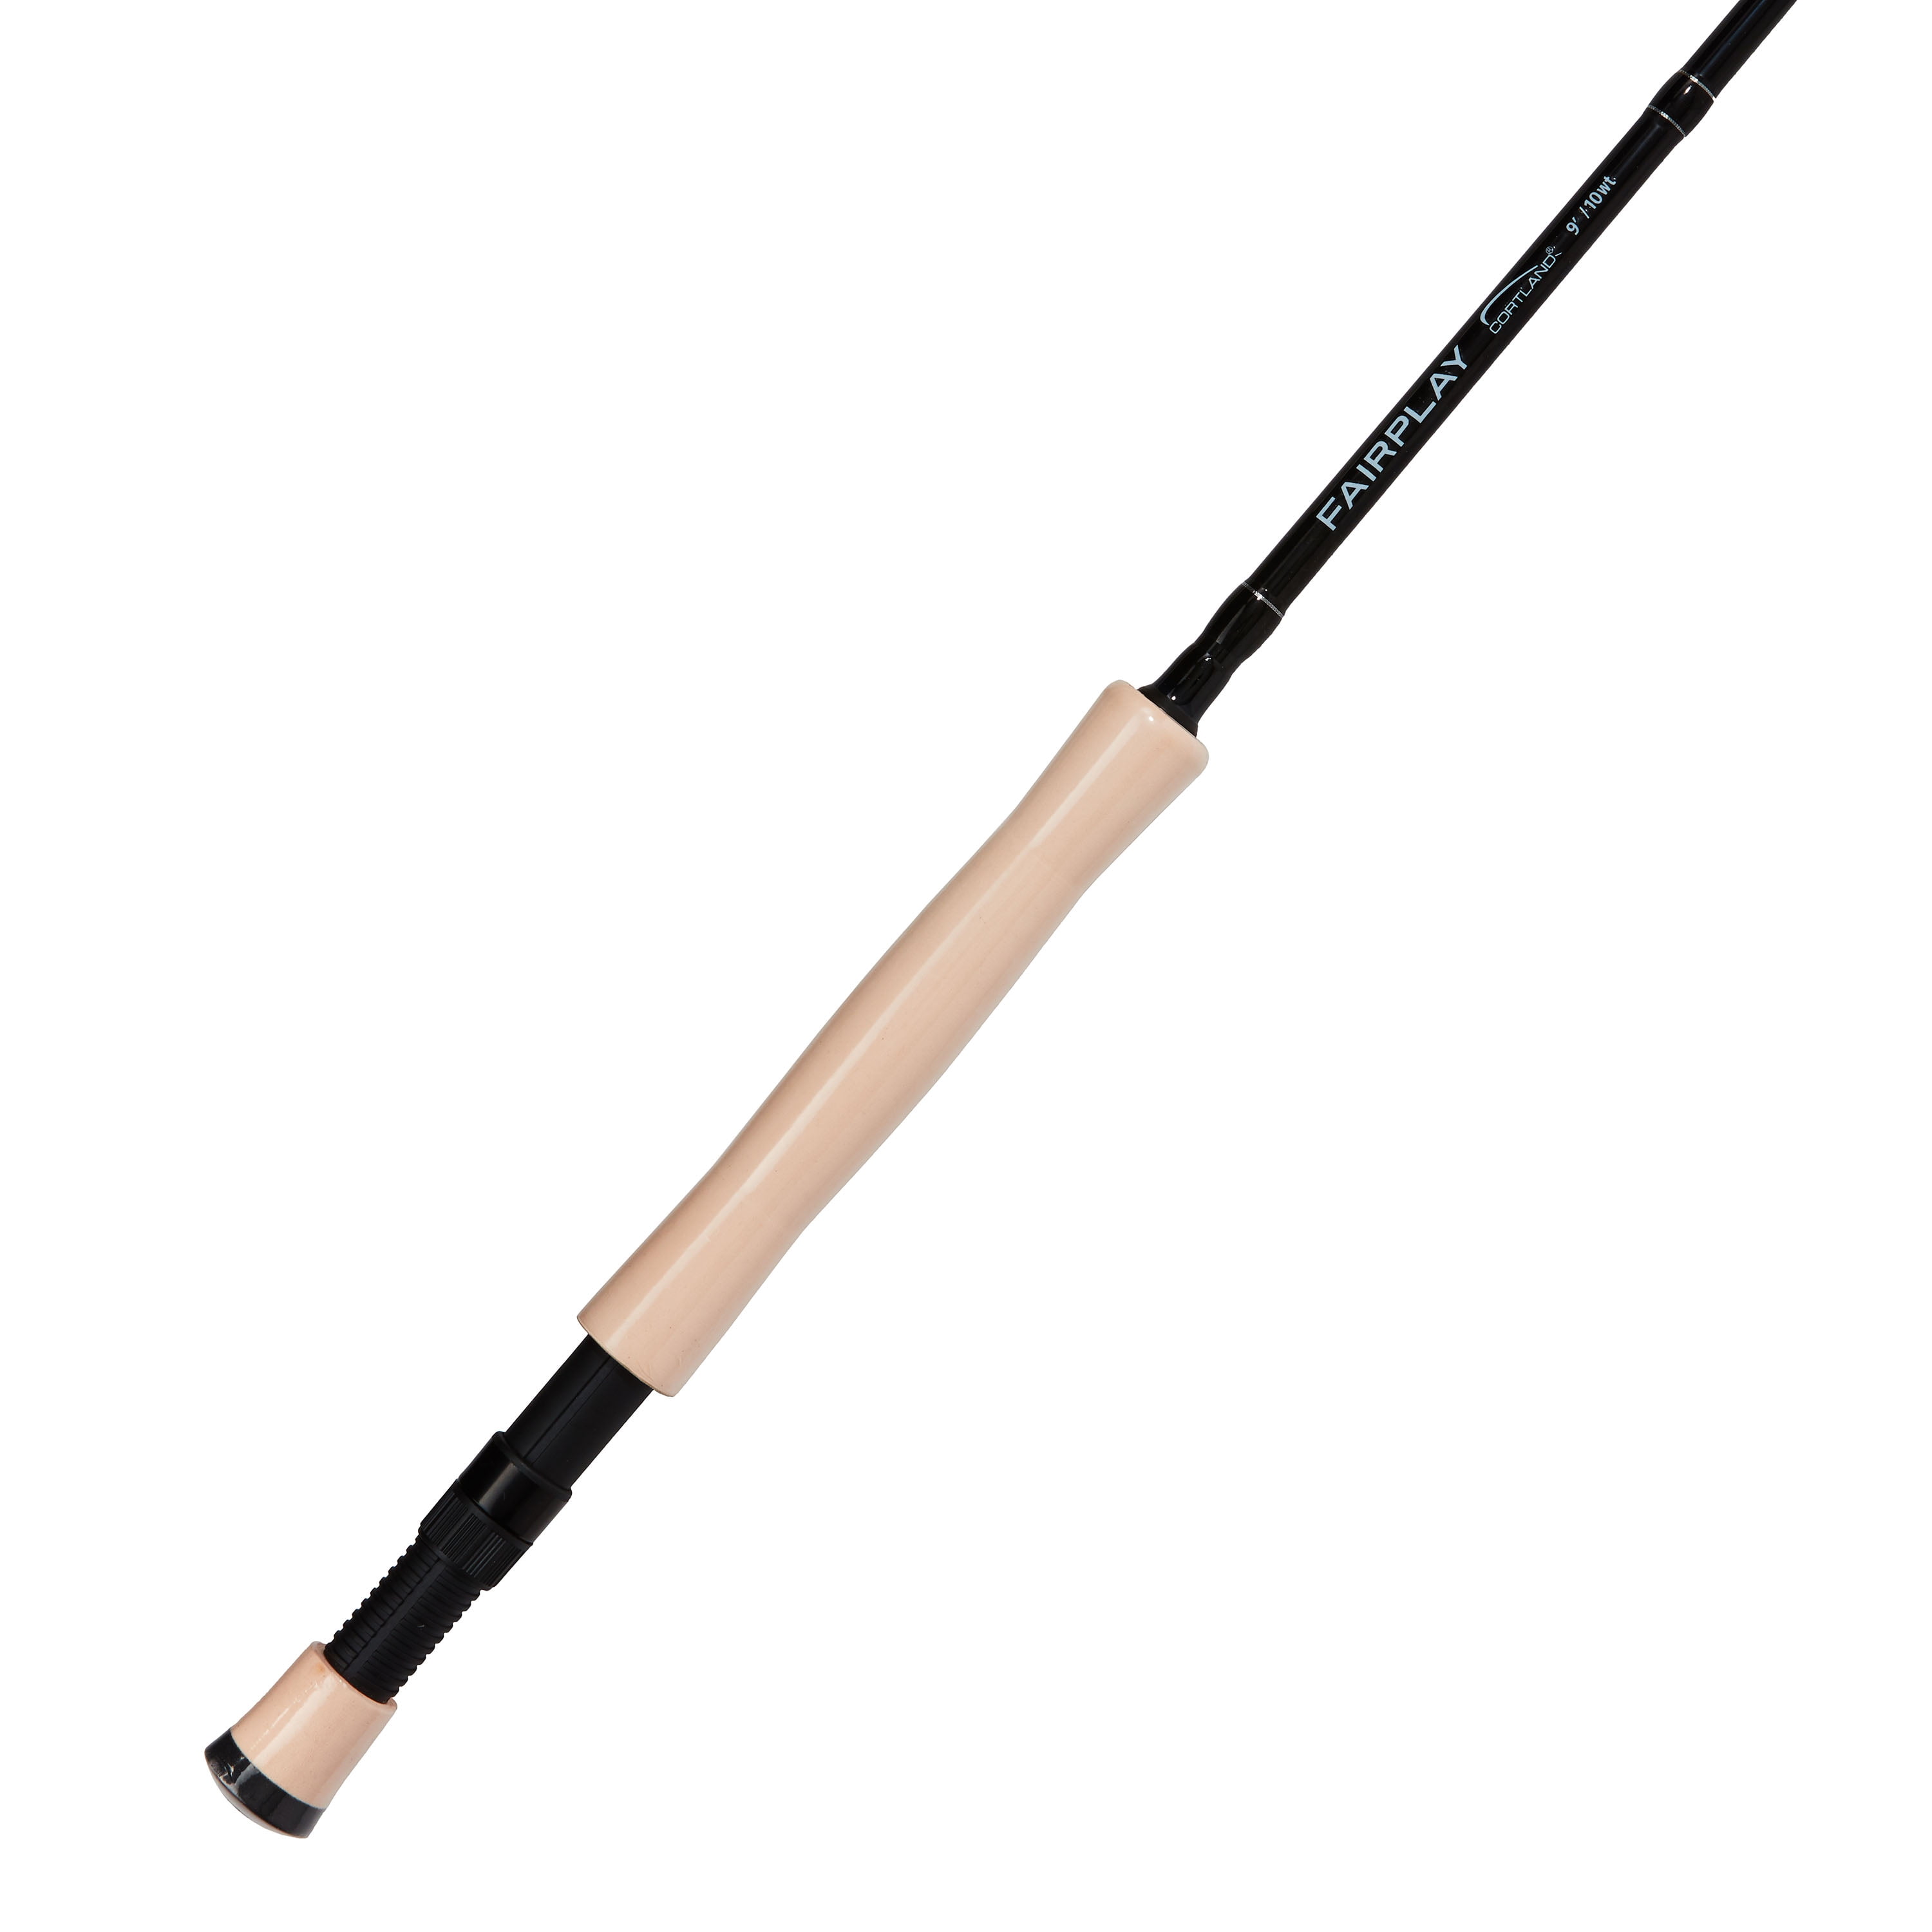 Cortland Fairplay 9' Saltwater Graphite Fly Rod India